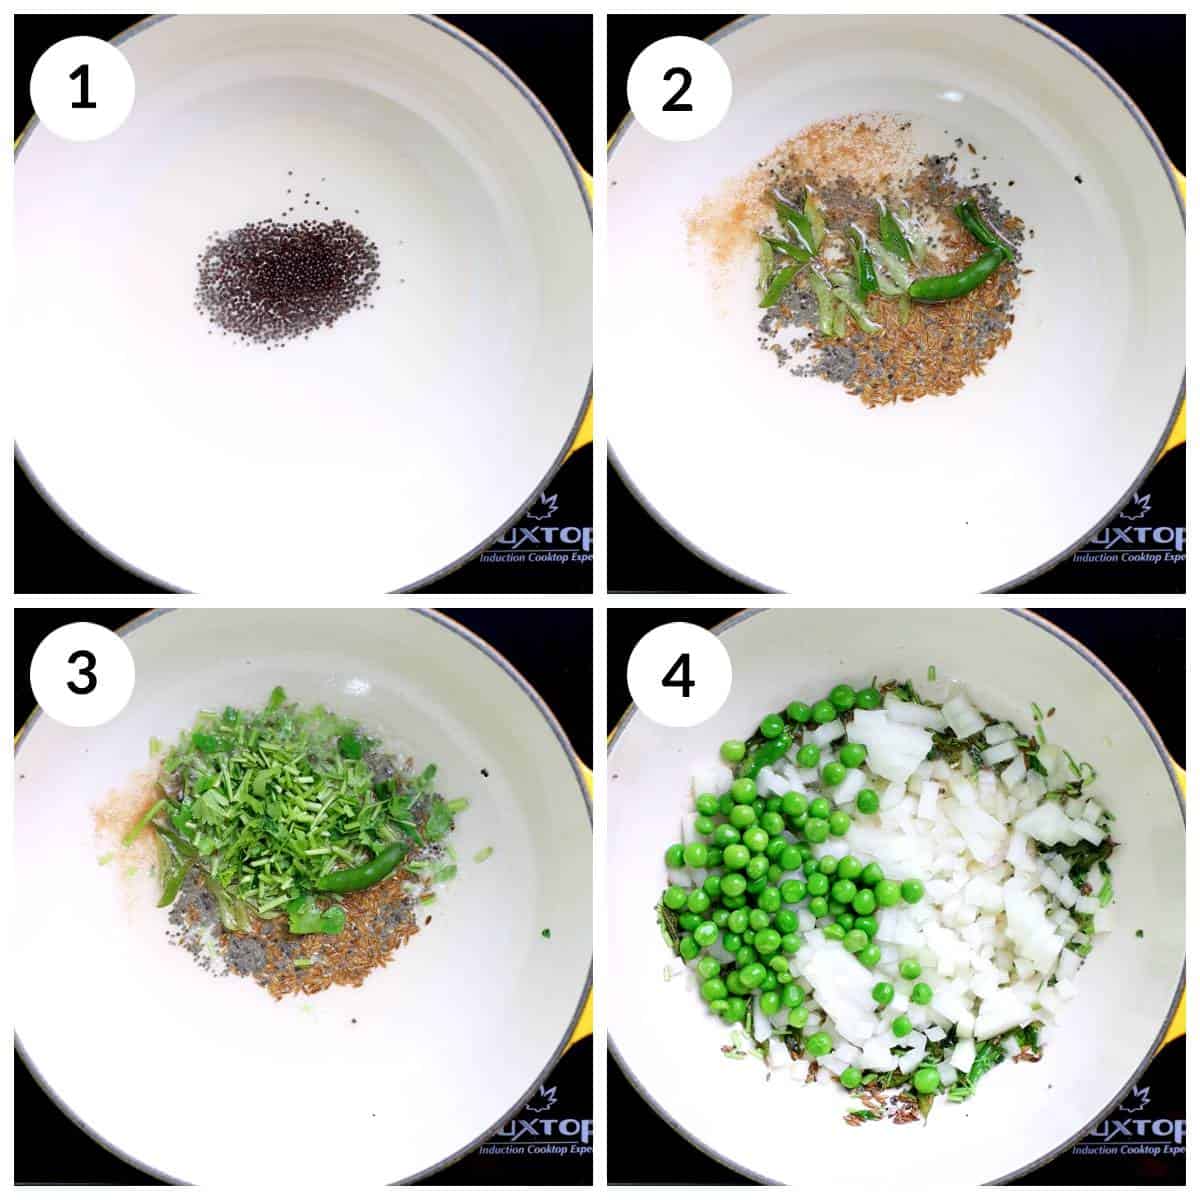 Steps for making tempering andd sautéing onion and peas for phodnicha bhaat